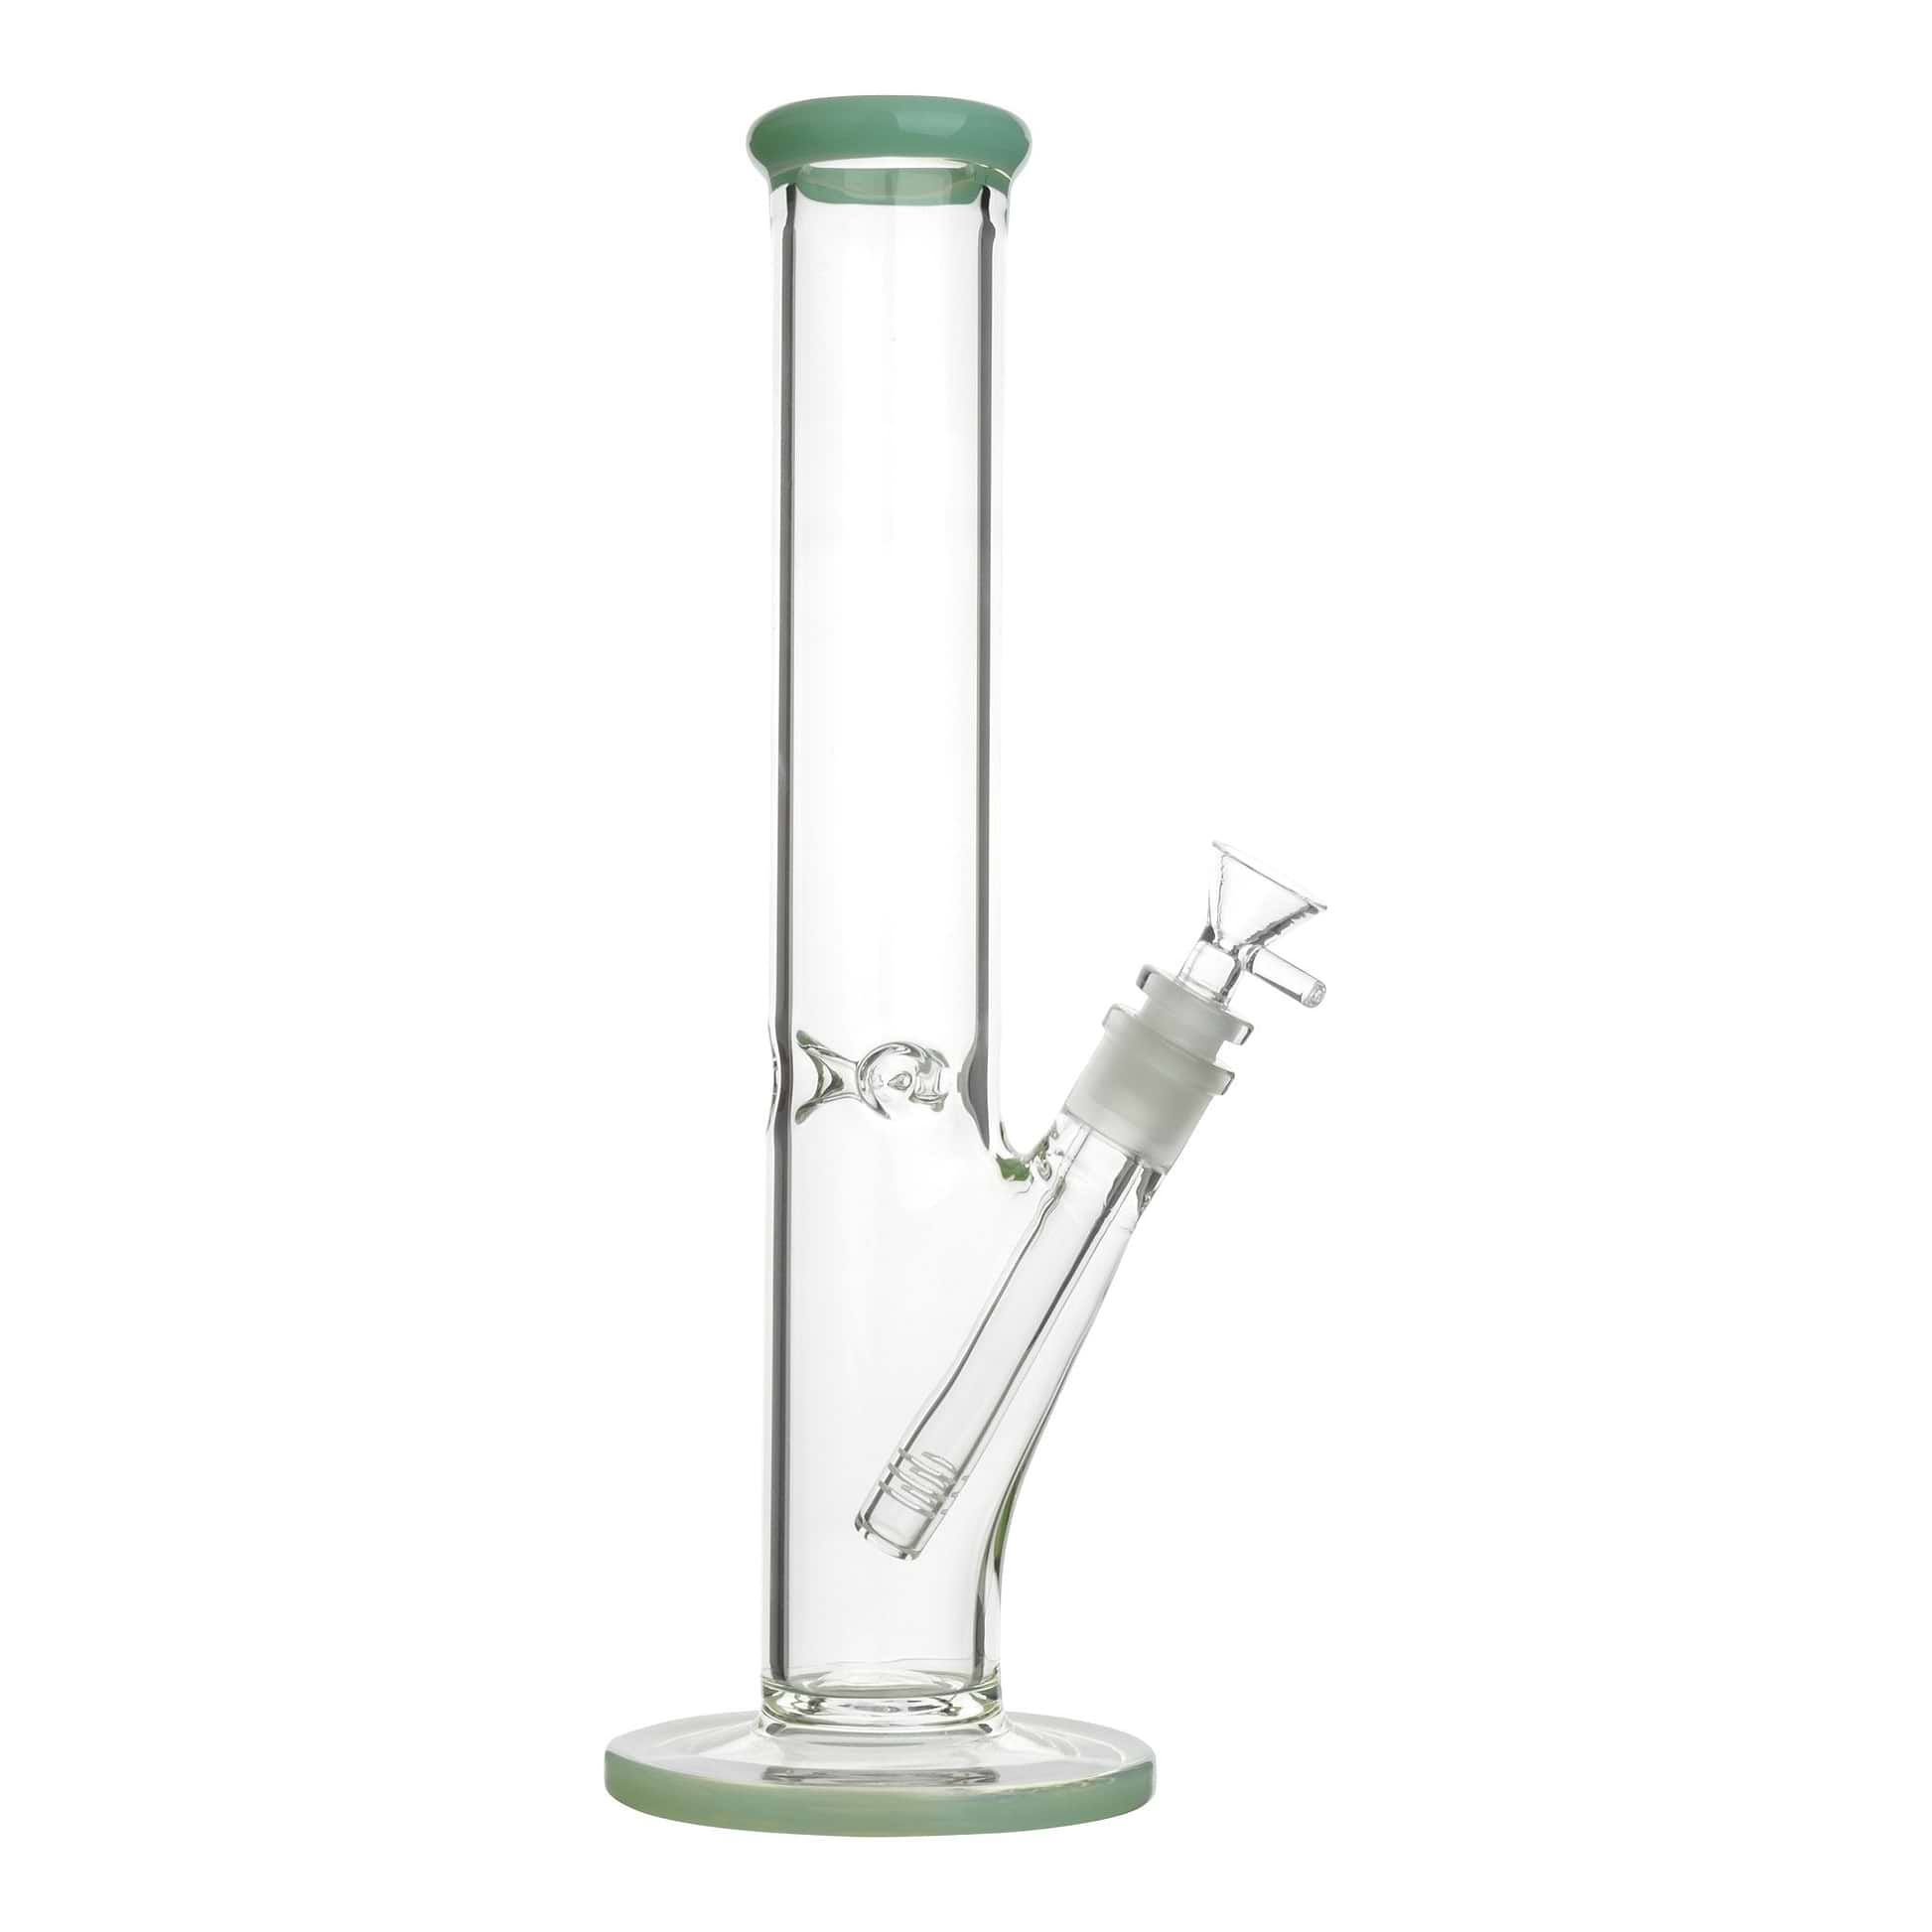 Full shot of 14 inch glass straight bong with jade mouthpiece and base bowl on right